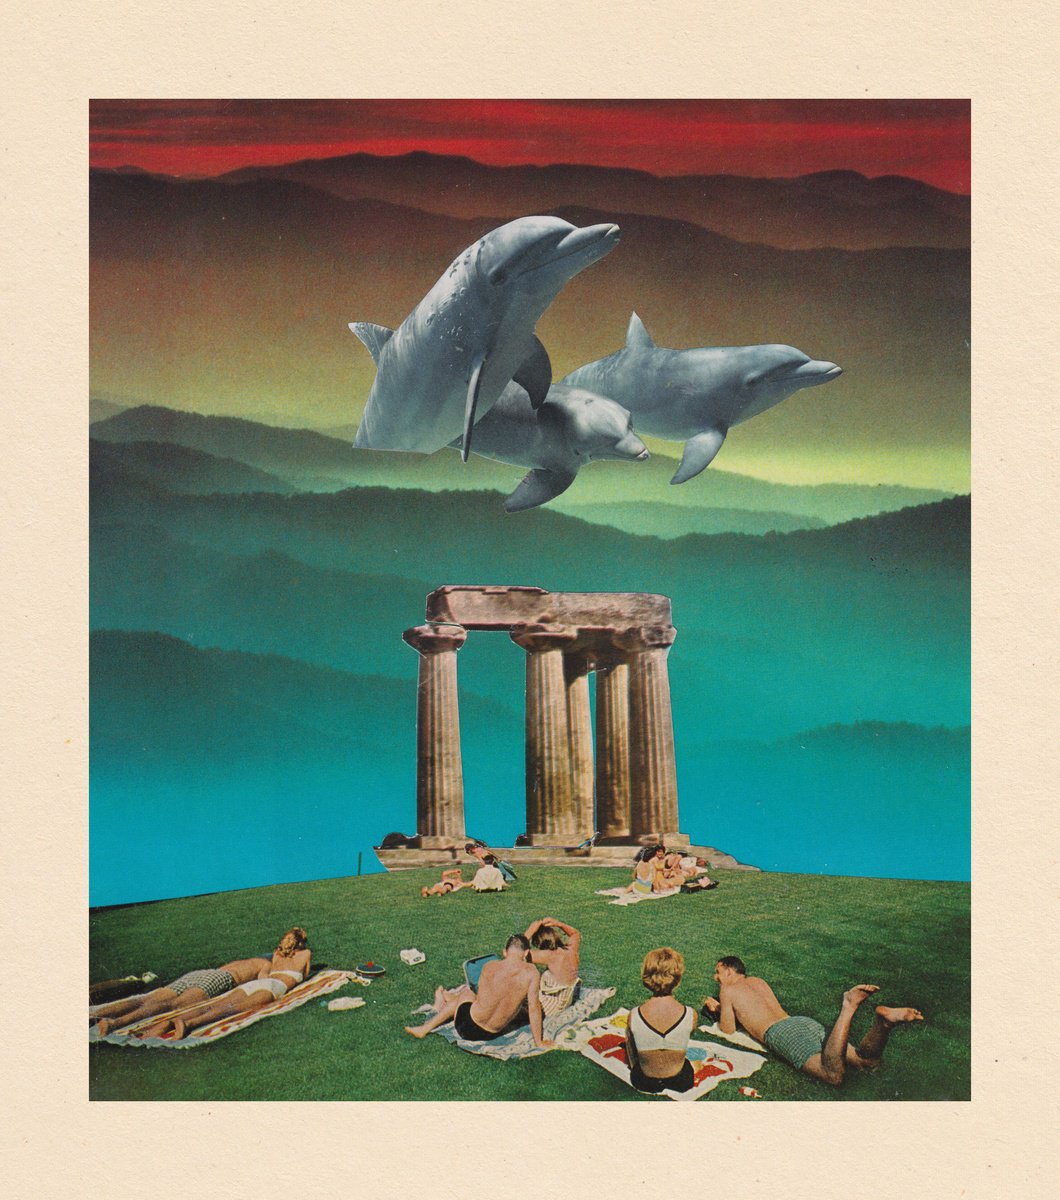 3D dolphins, the Panteon & the trippers by Jon Garbet